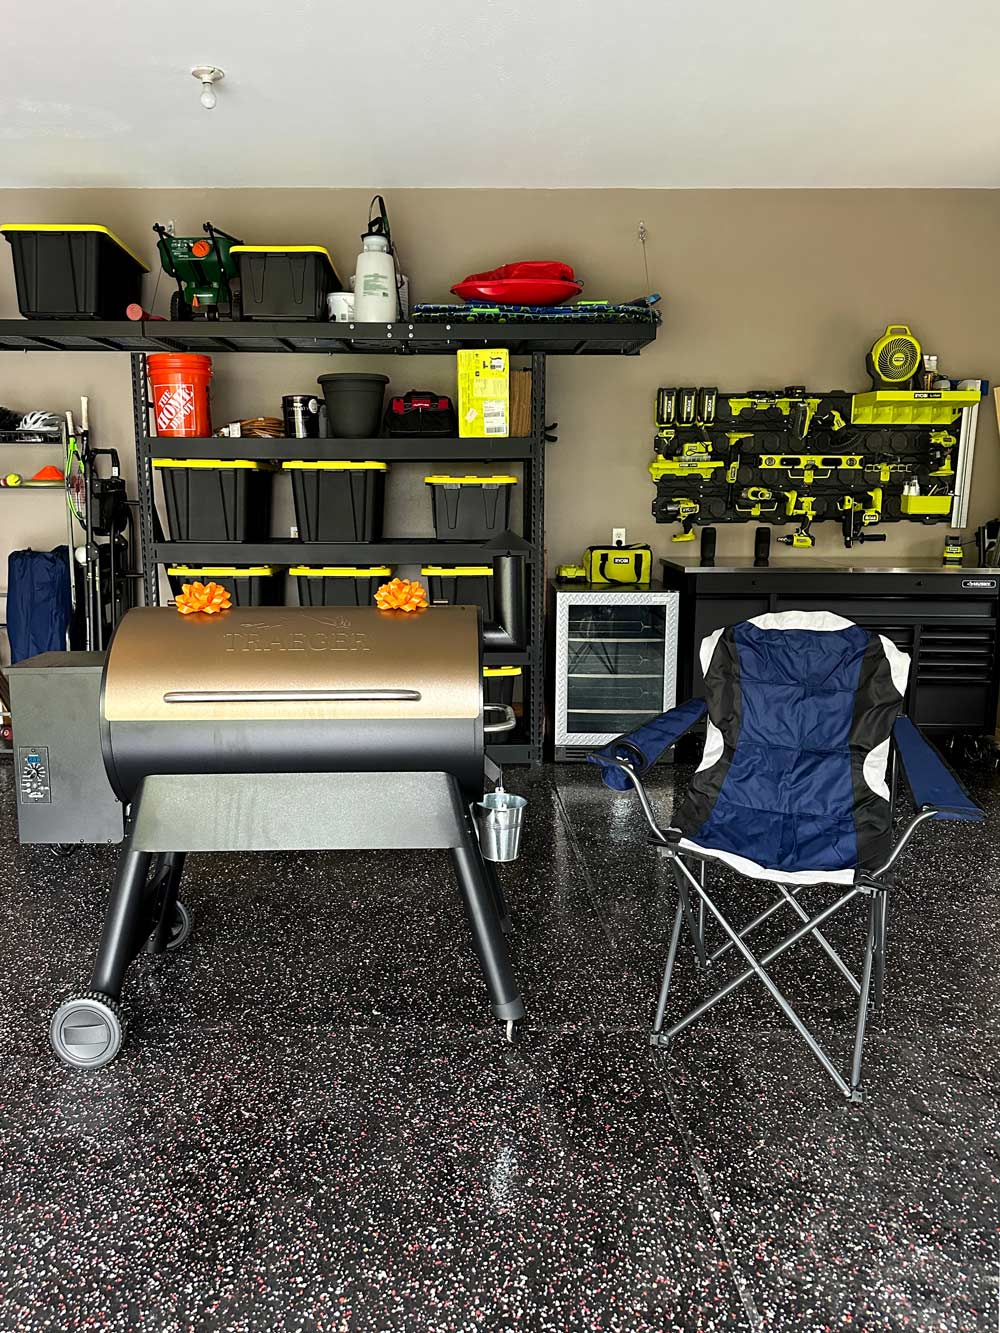 A clean garage with storage shelving, containers, a workbench equipped with tools, and a grill with bows.